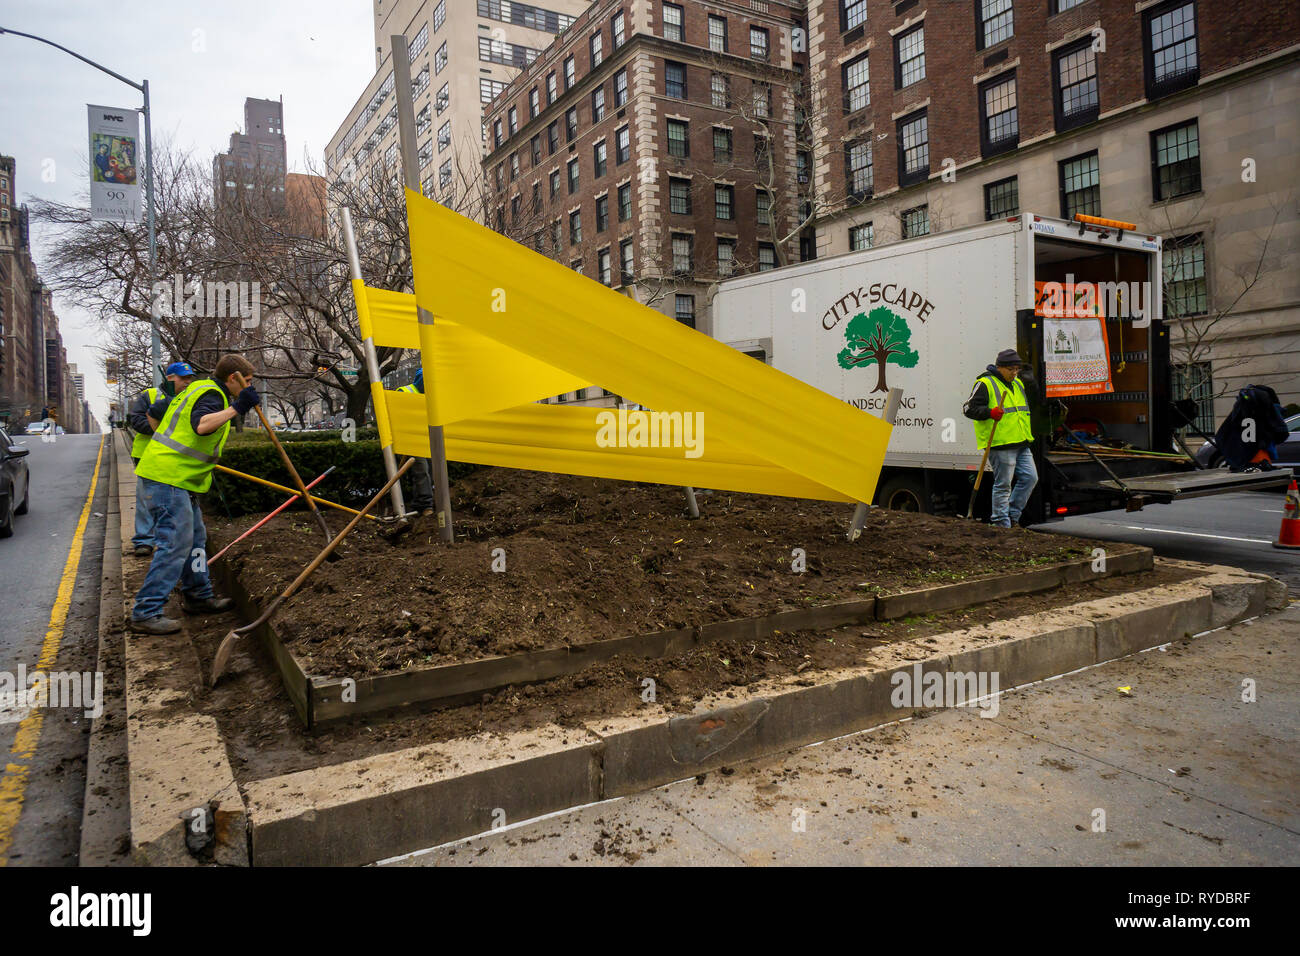 Workers install one of five 'Tension Sculptures' by the artist Joseph La Piana on a Park Avenue median at 67th St in New York on Sunday, March 3, 2019. Made of synthetic rubber and stainless steel the artworks will be on display on five corners of Park Avenue from 53rd St to 70 St until the end of July.  the The Fund for Park Avenue and the NYC Parks and Recreation Dept. have been presenting public art on the medians since 1969.  (Â© Richard B. Levine) Stock Photo